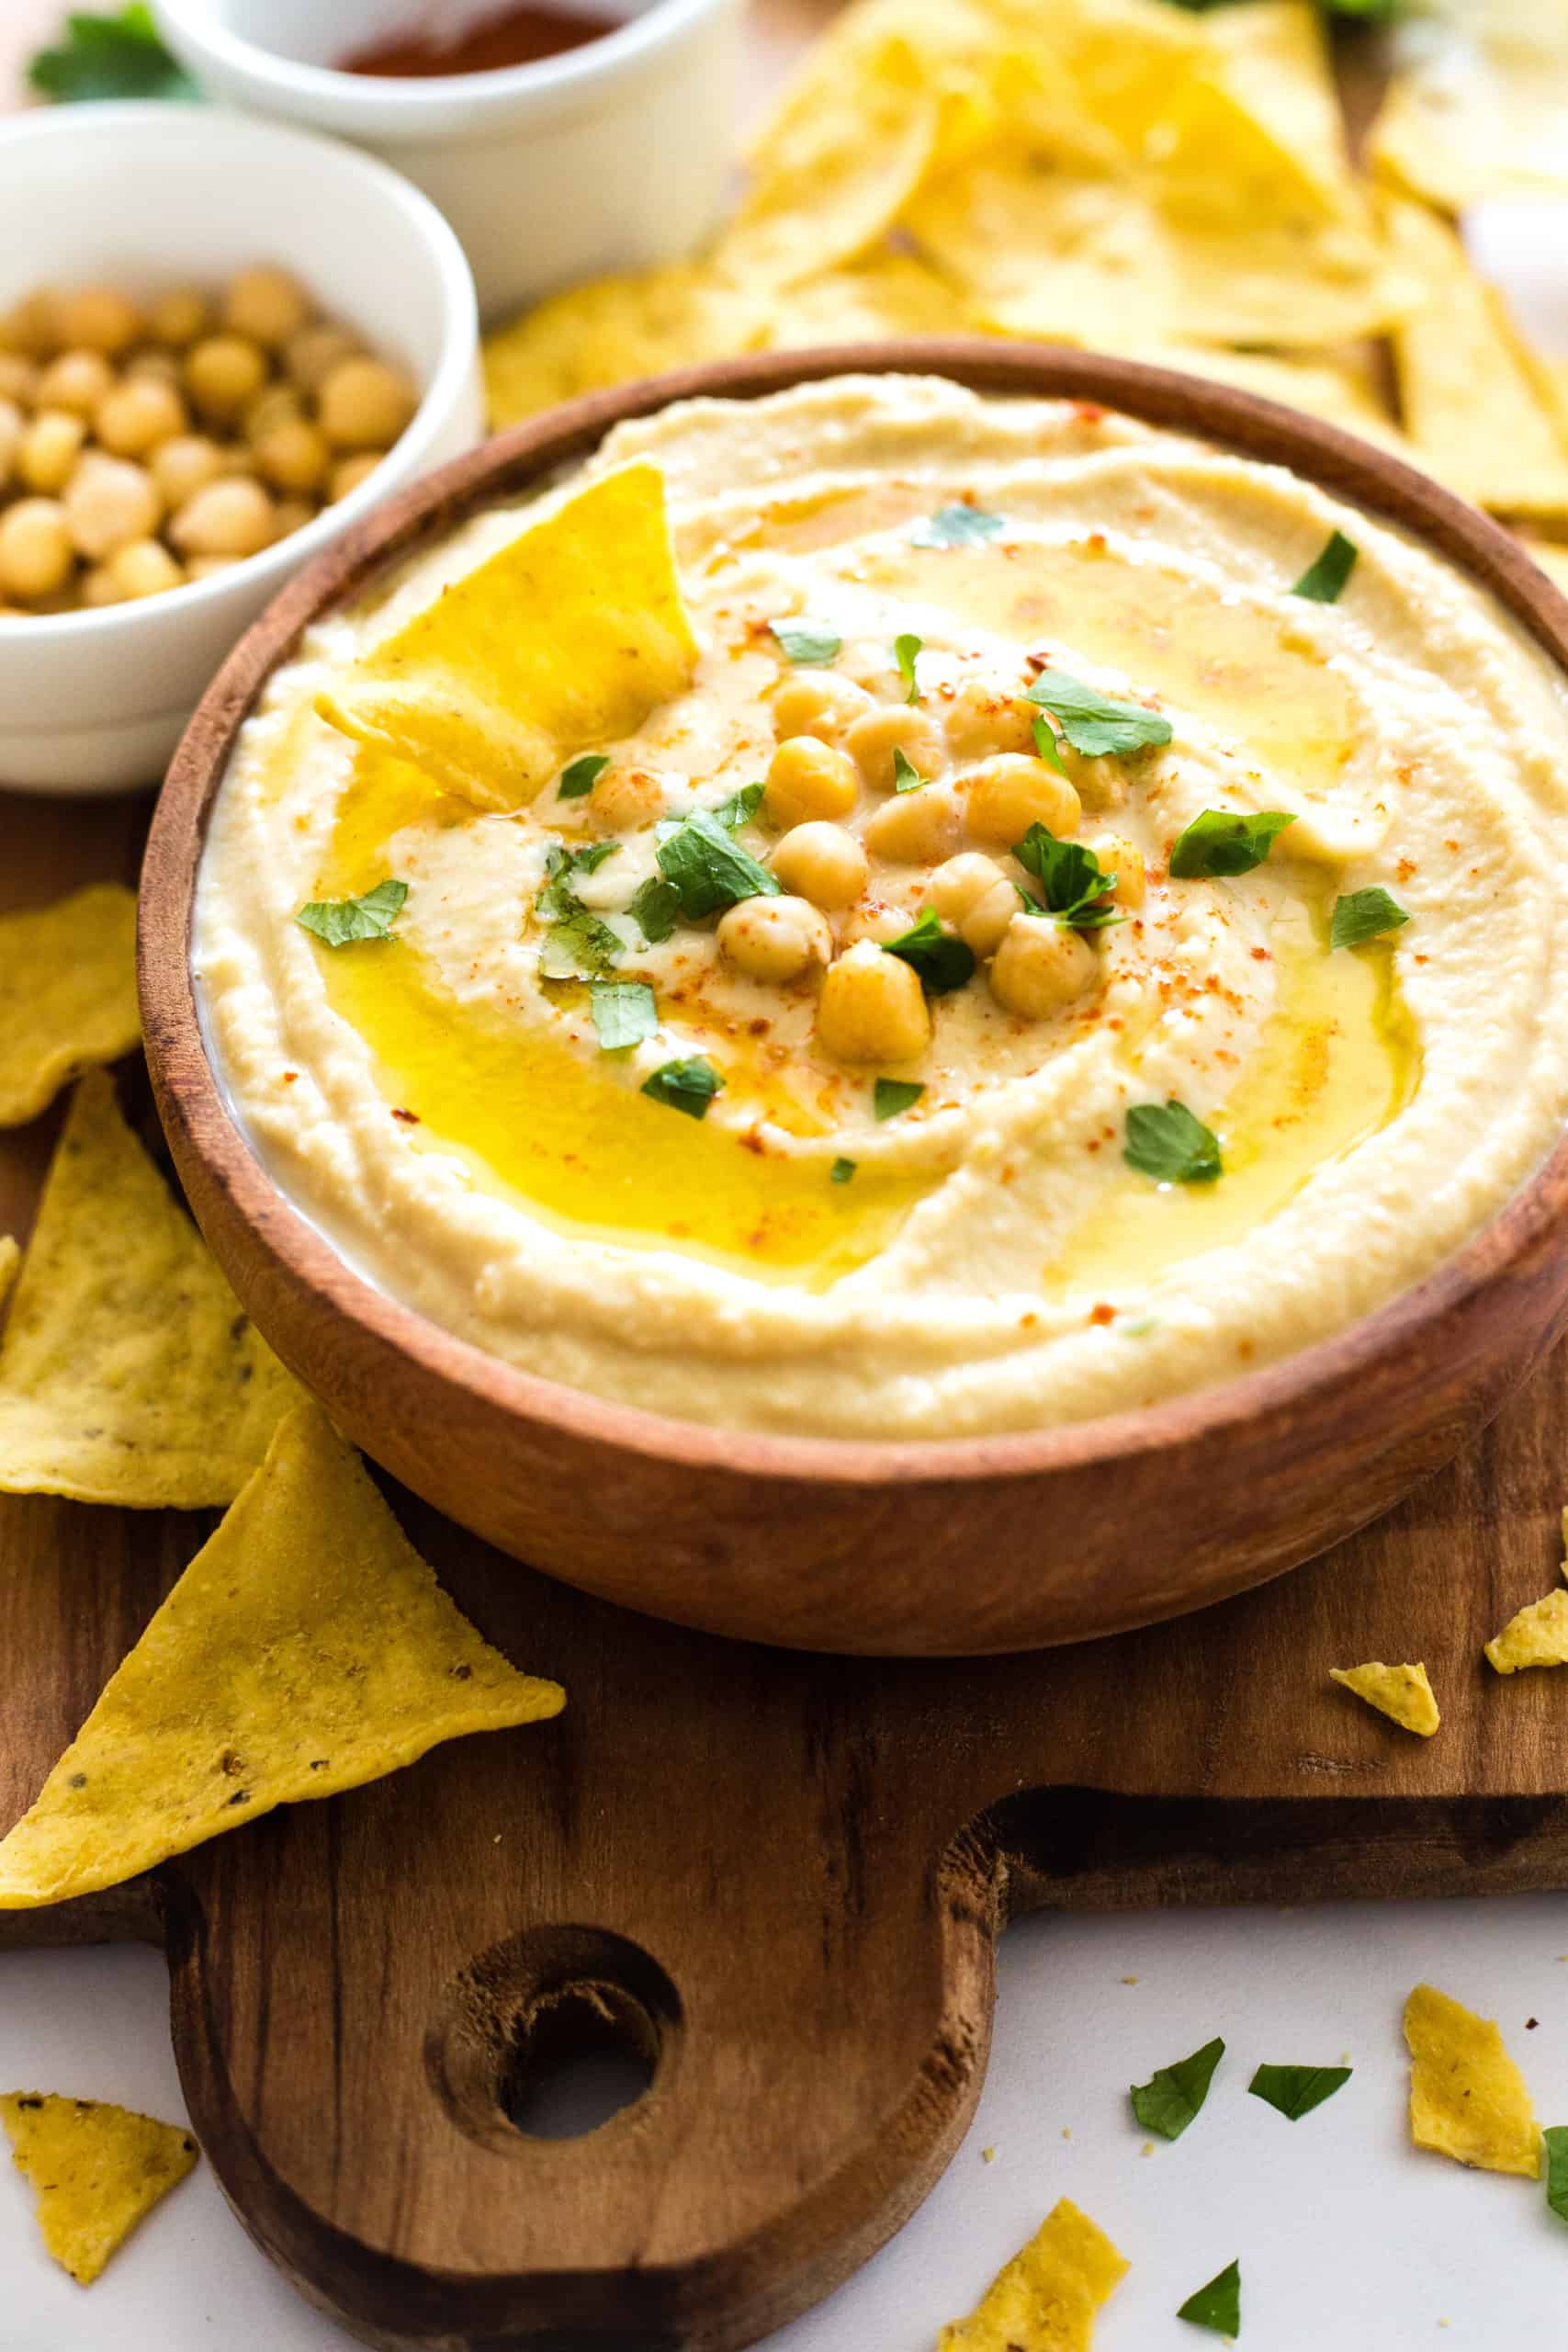 A bowl of creamy gluten free hummus and tortilla chips on a wooden board.